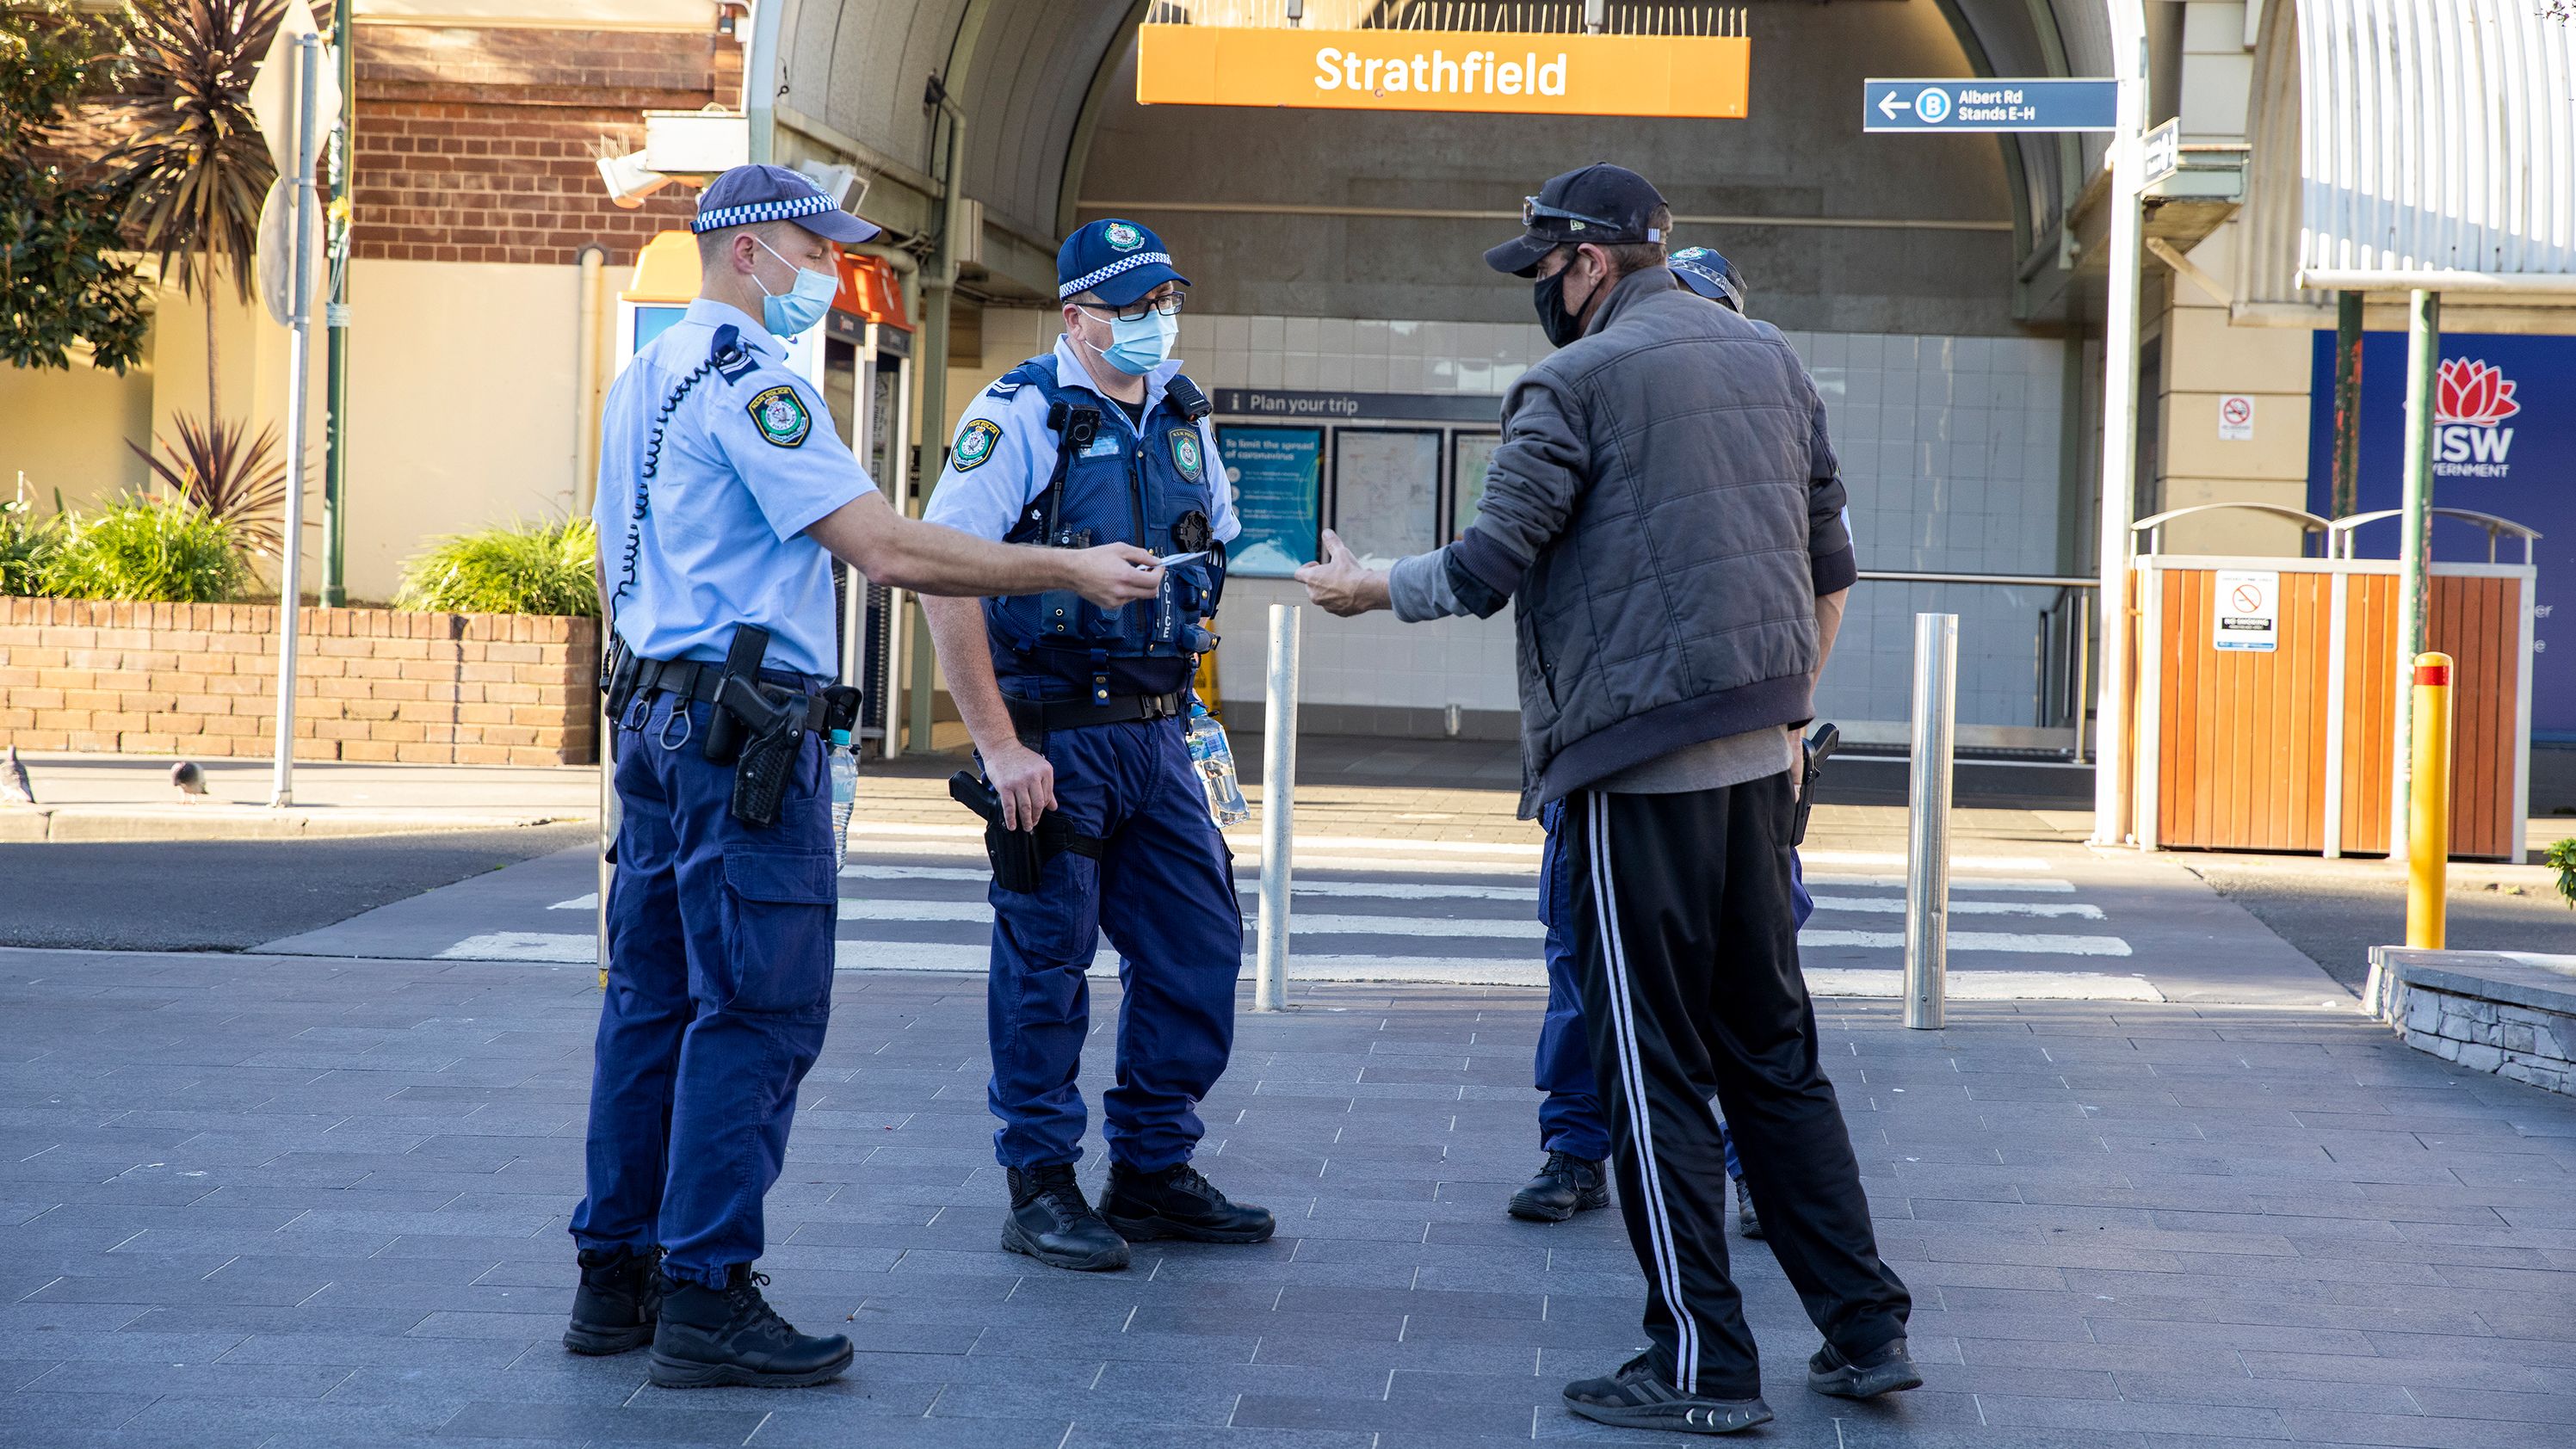 Police officers approach a man for not wearing a mask at Strathfield station, Sydney, on August 12.